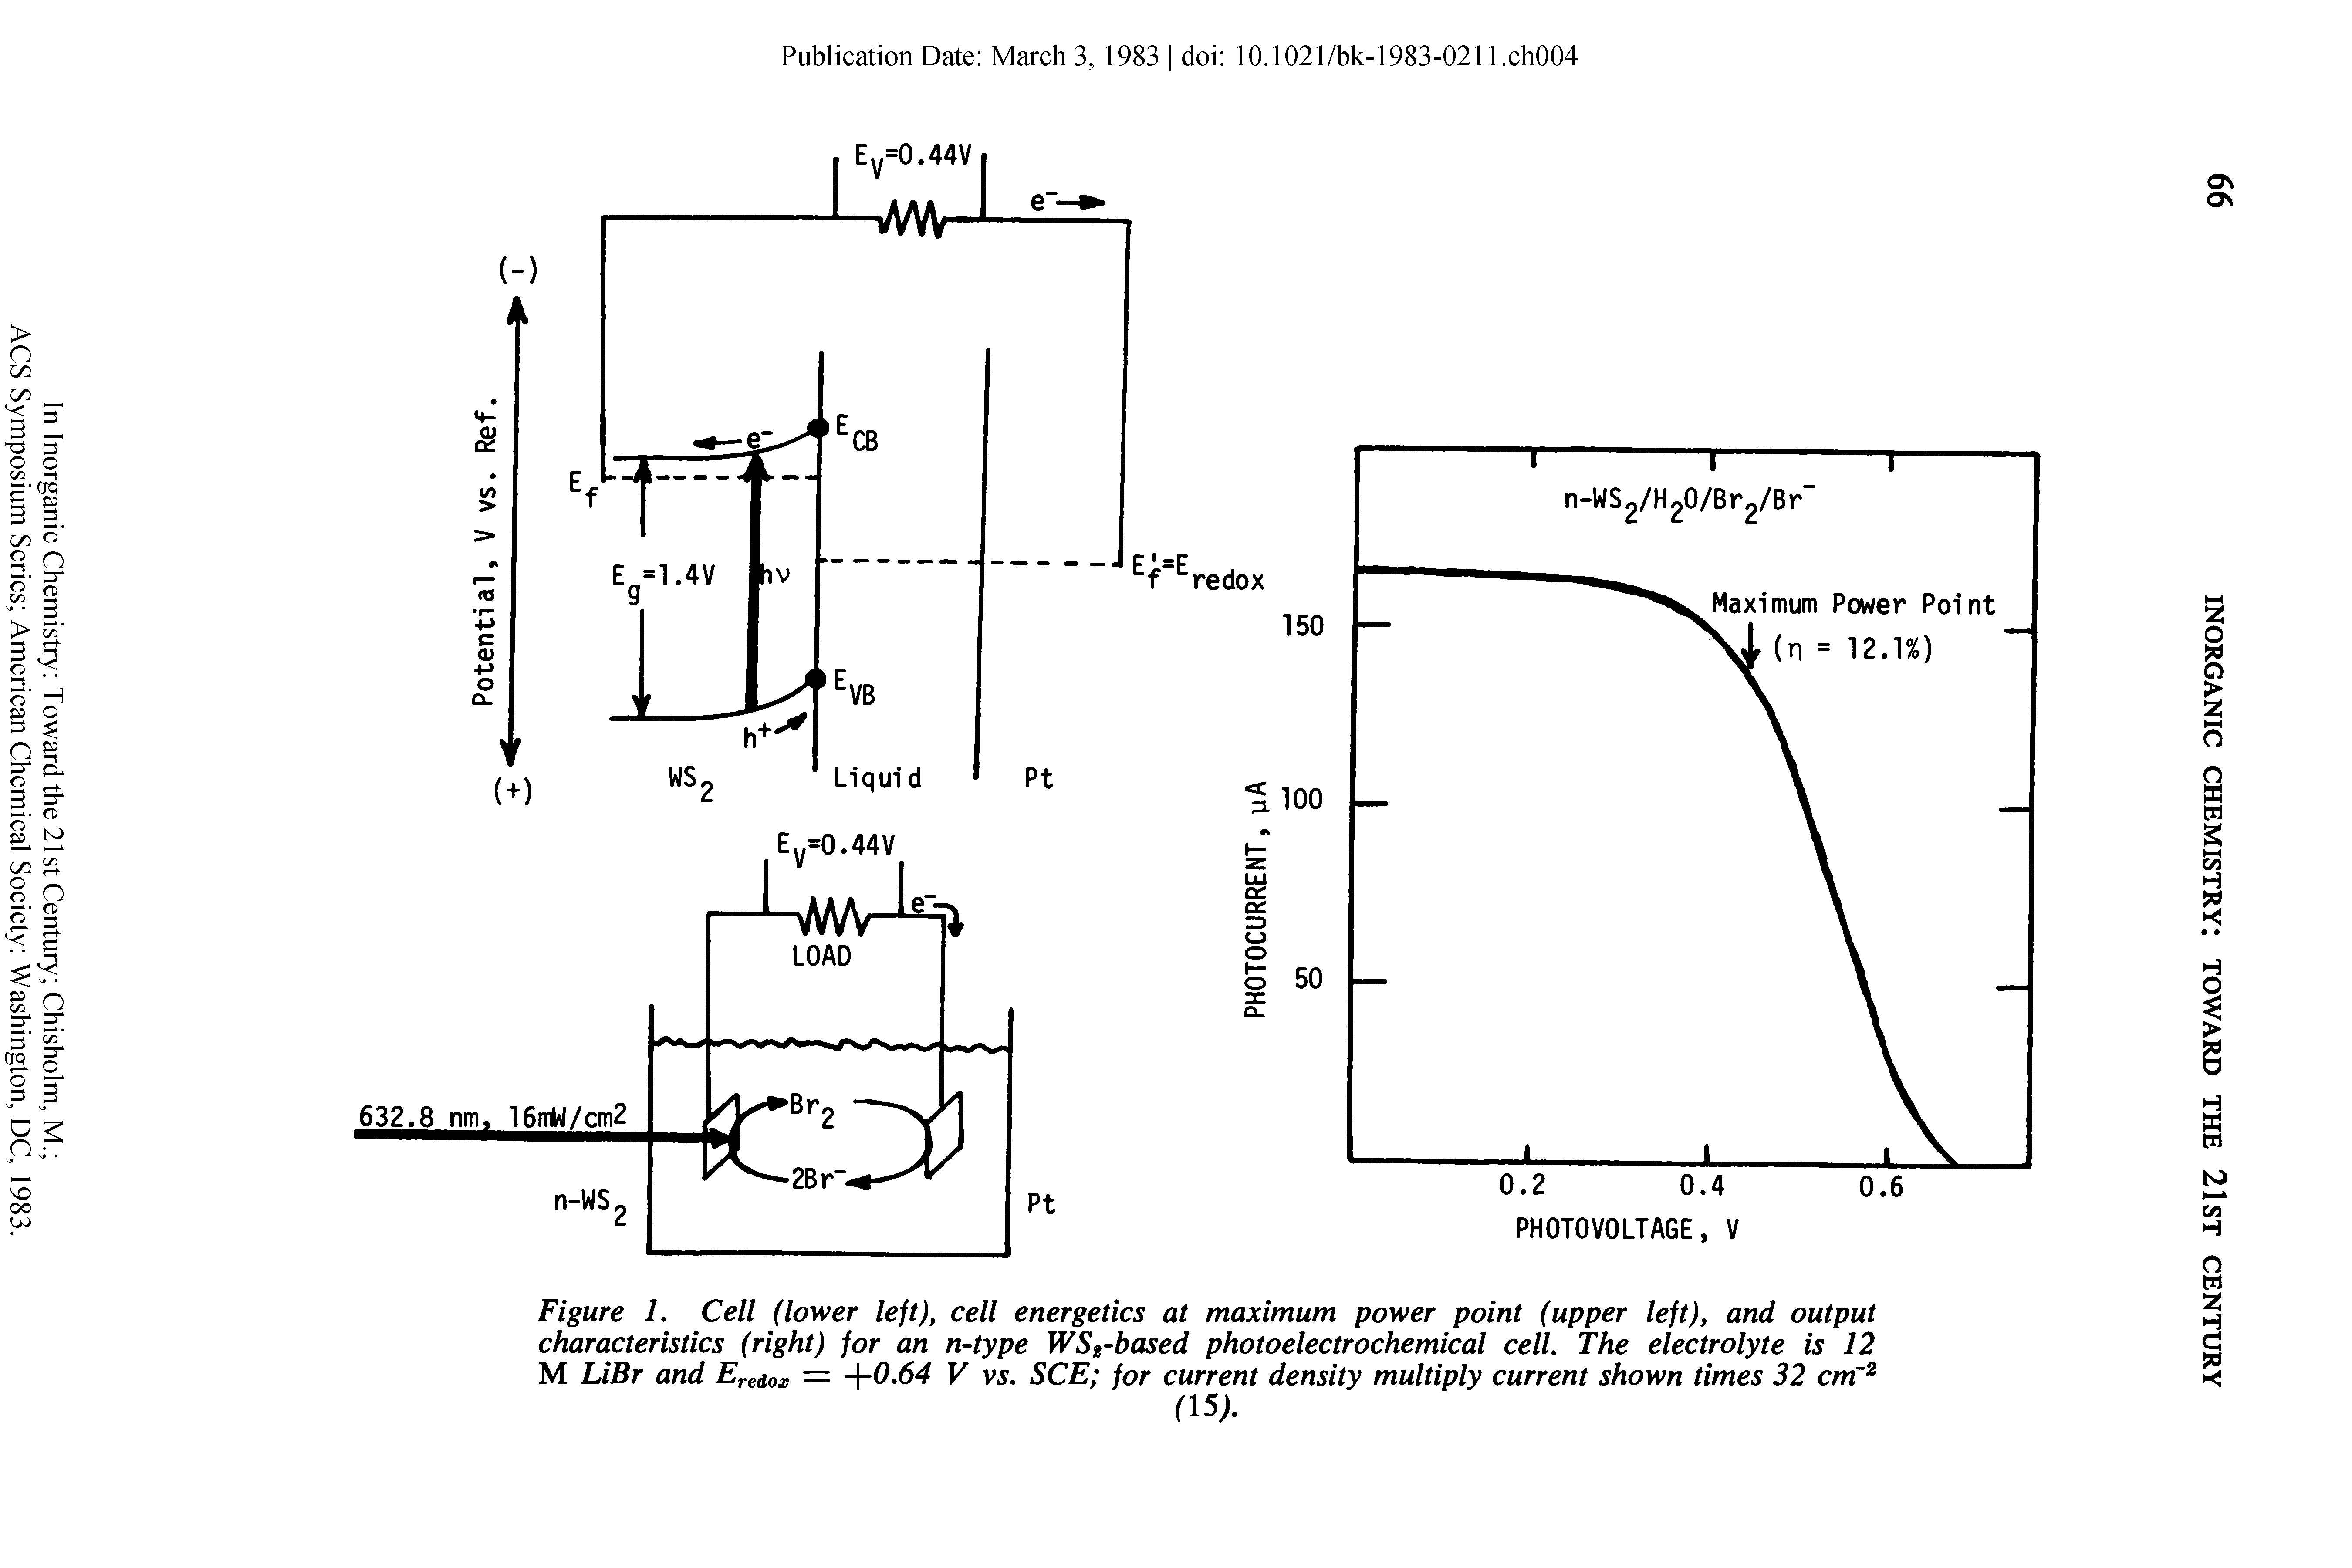 Figure L Cell (lower left), cell energetics at maximum power point (upper left), and output characteristics (right) for an n-type WS2-based photoelectrochemical cell, The electrolyte is 12 M LiBr and Eredox = +0,64 V vs, SCE for current density multiply current shown times 32 cm 2...